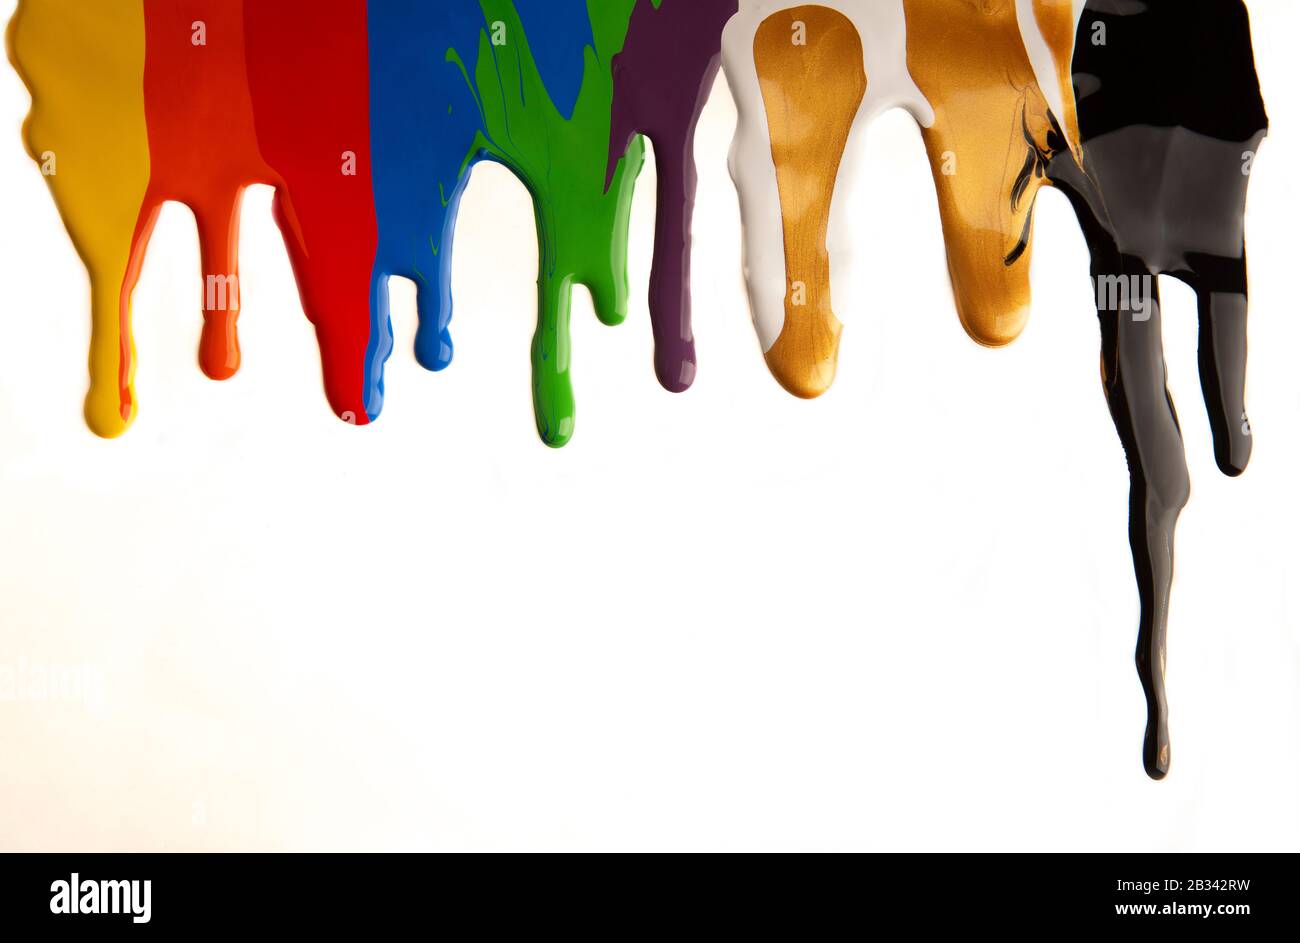 Colorful paint dripping isolated on a white background Stock Photo